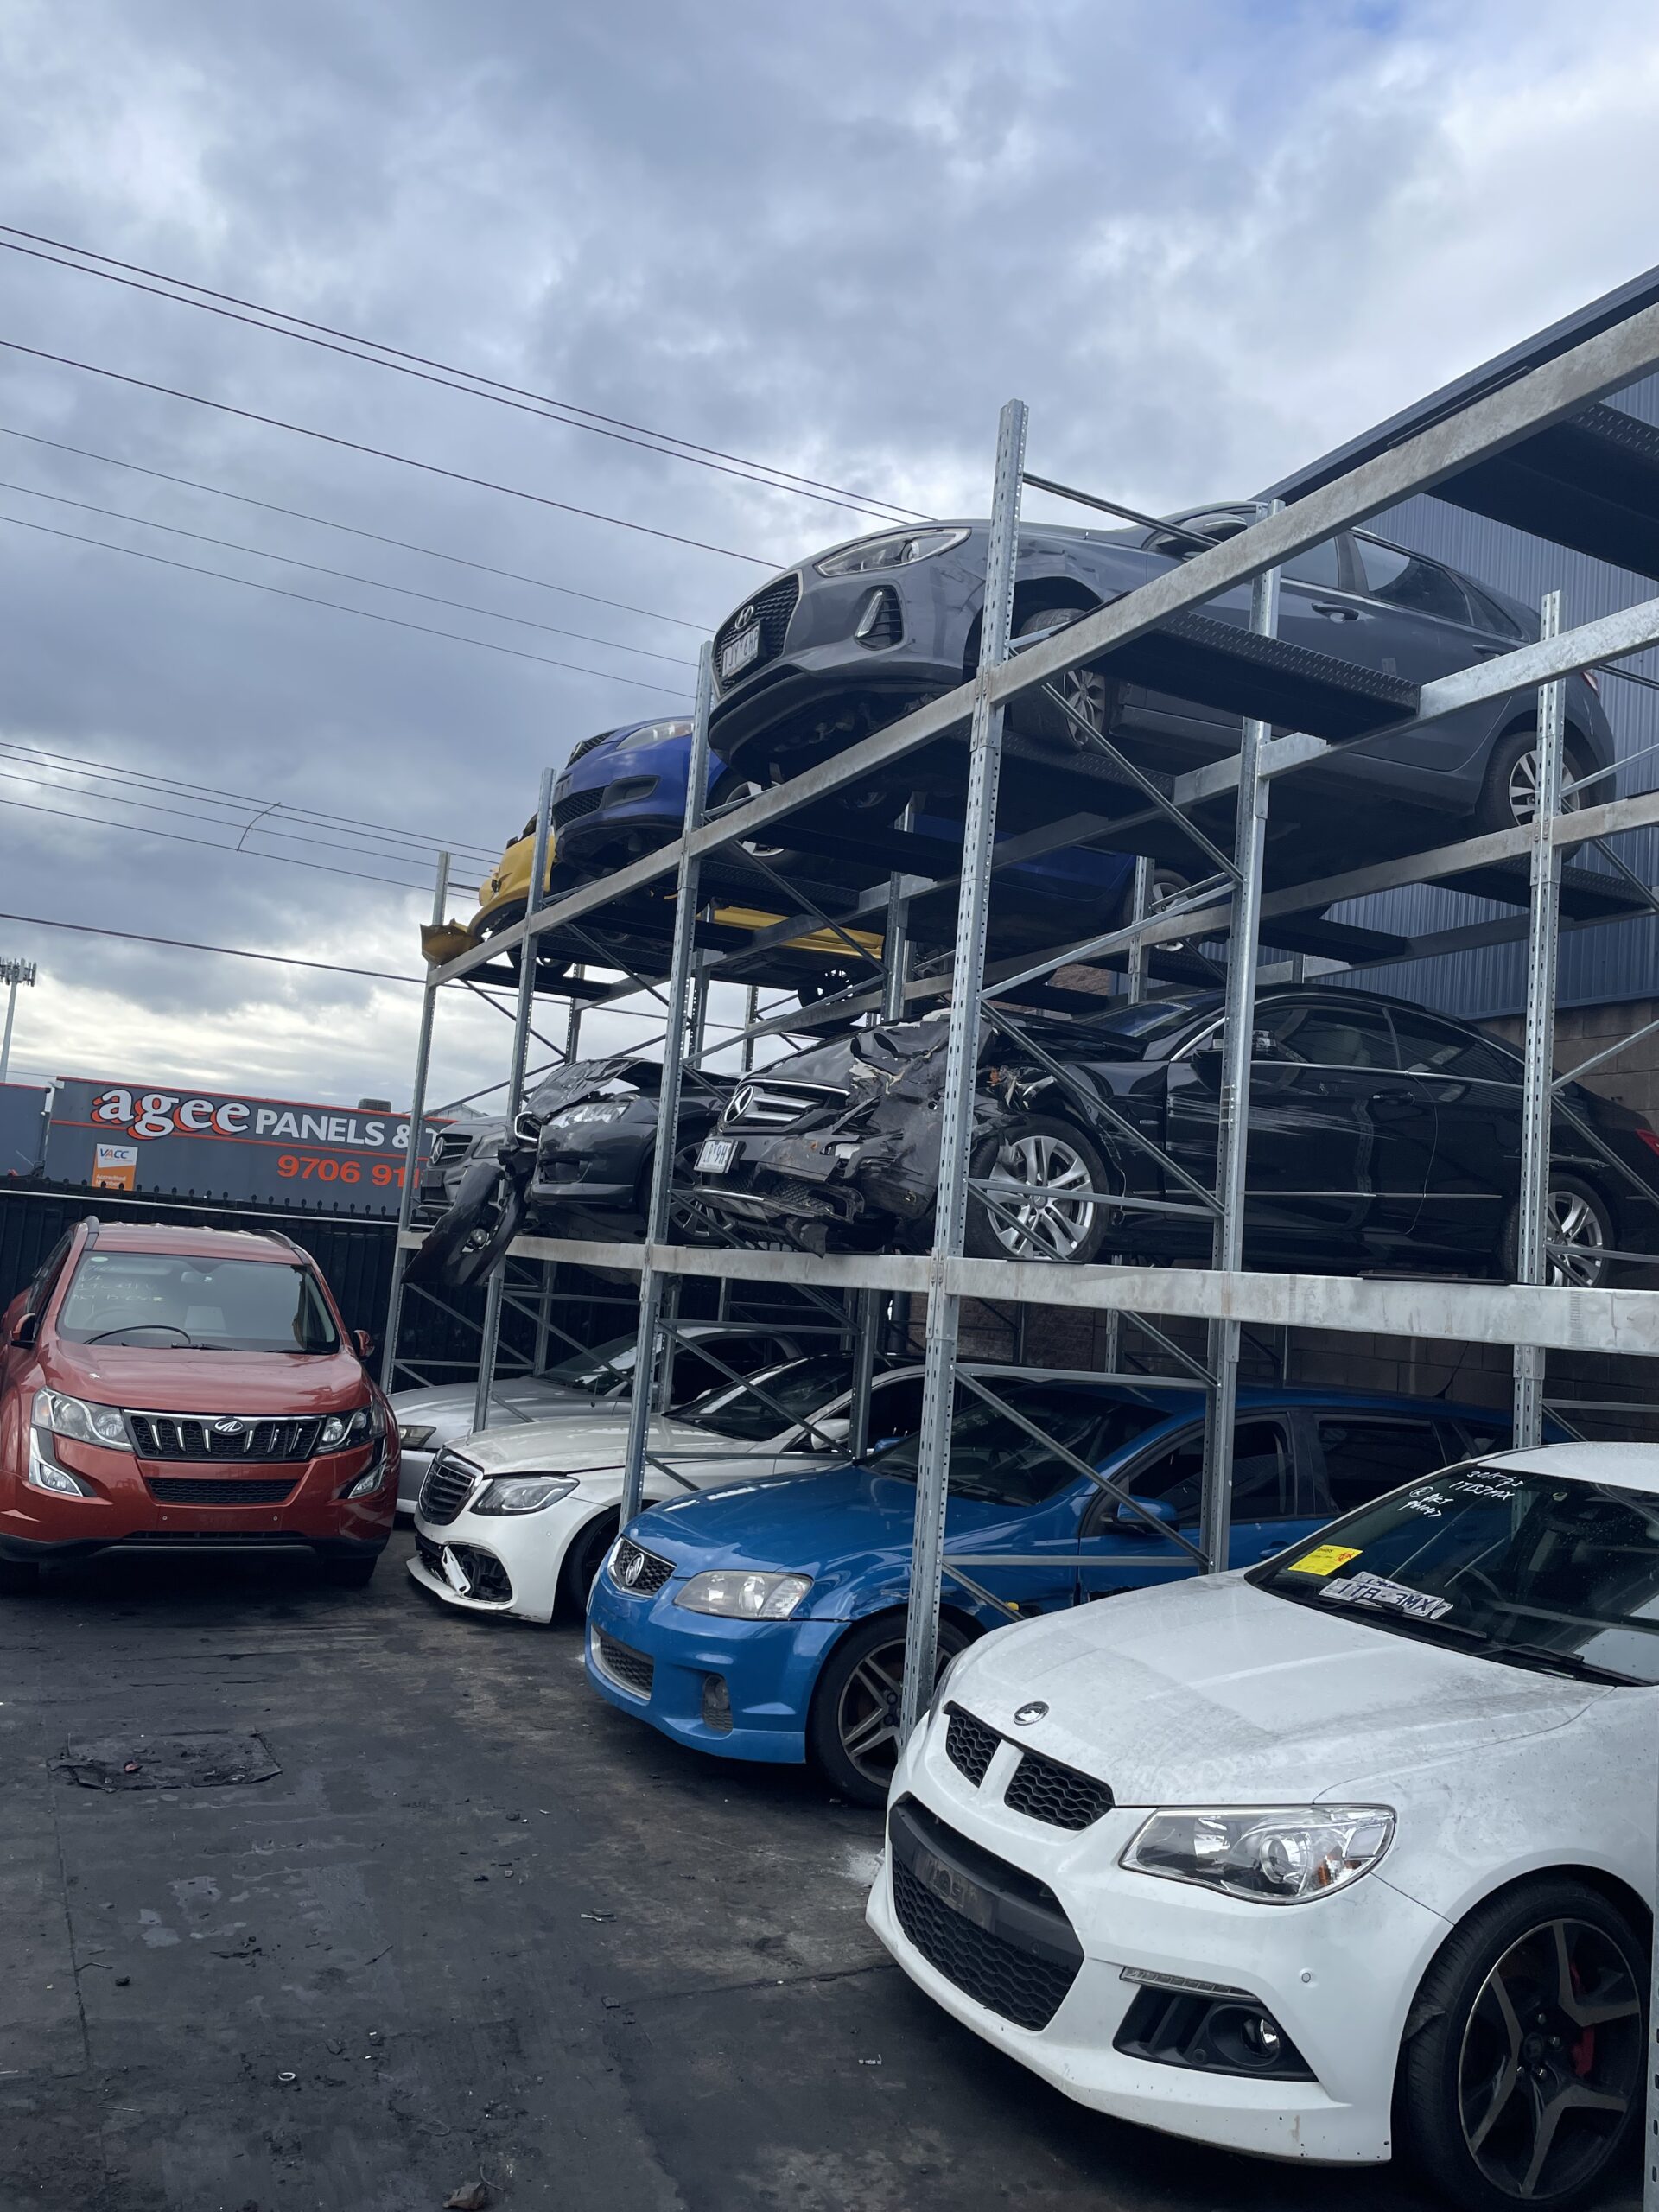 Car yard with many damaged cars. Custom car racking is being used to stack the cars three high.